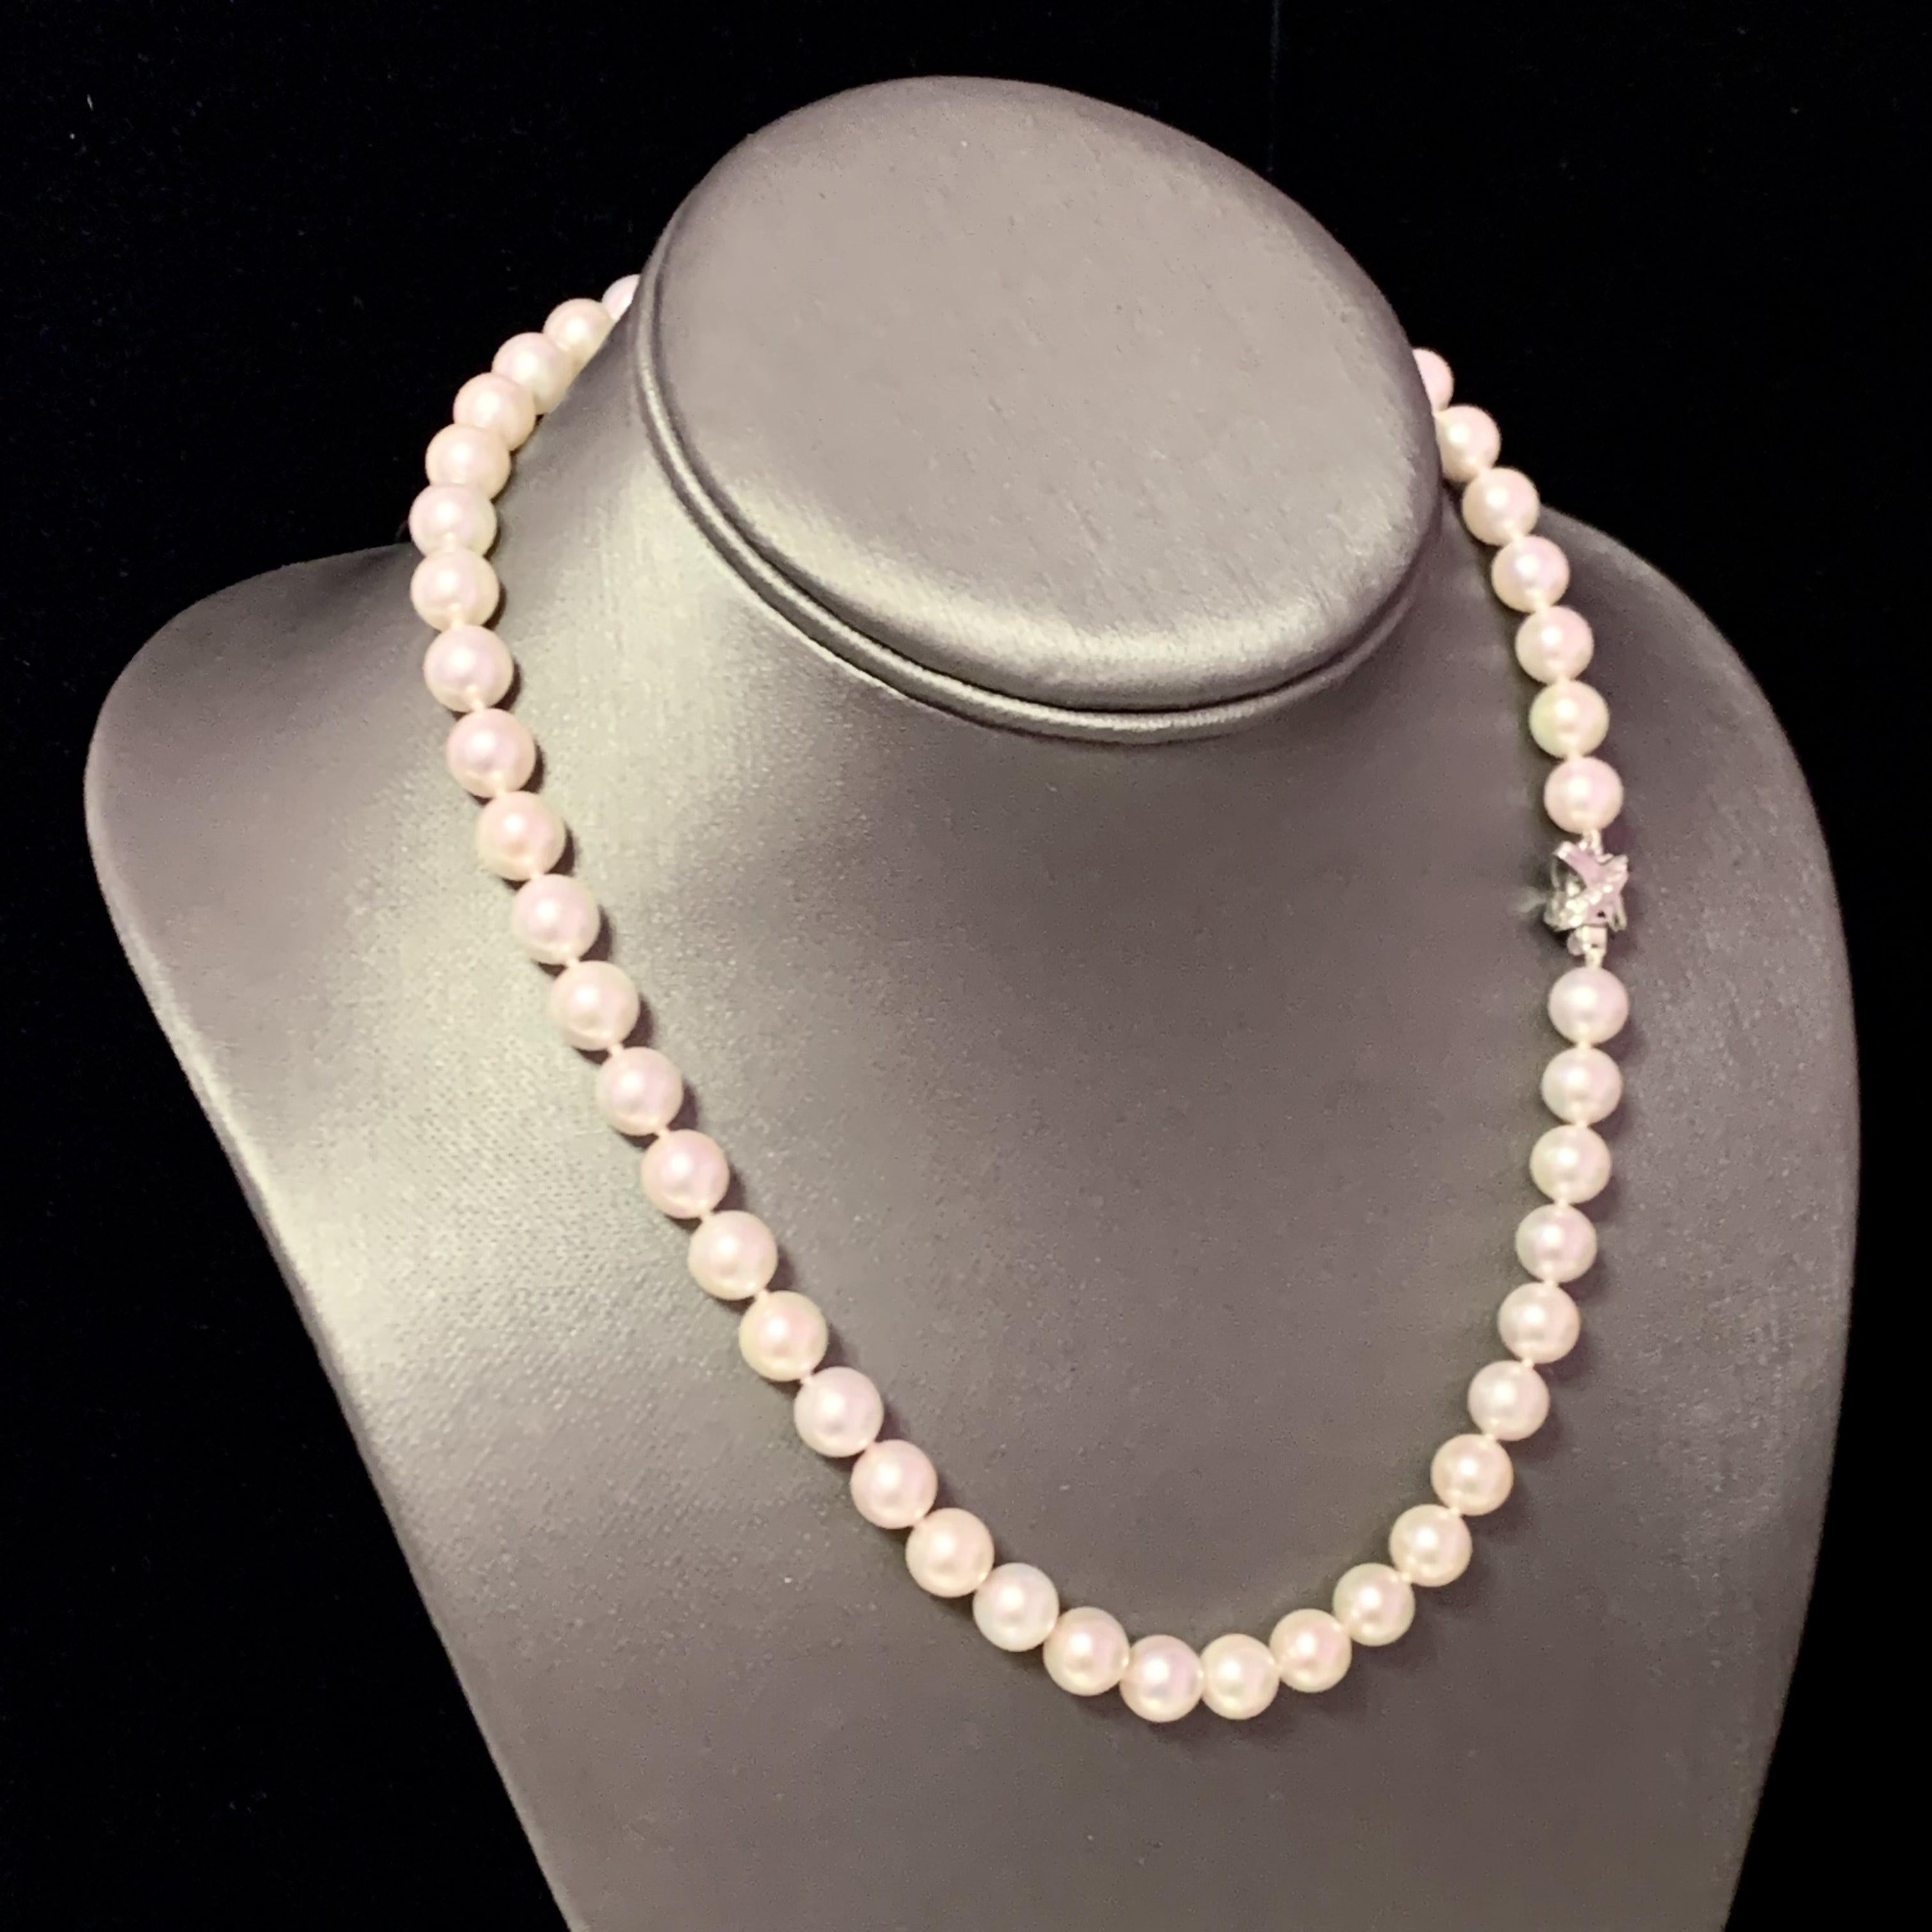 Fine Quality Akoya Pearl Necklace 14k White Gold 17